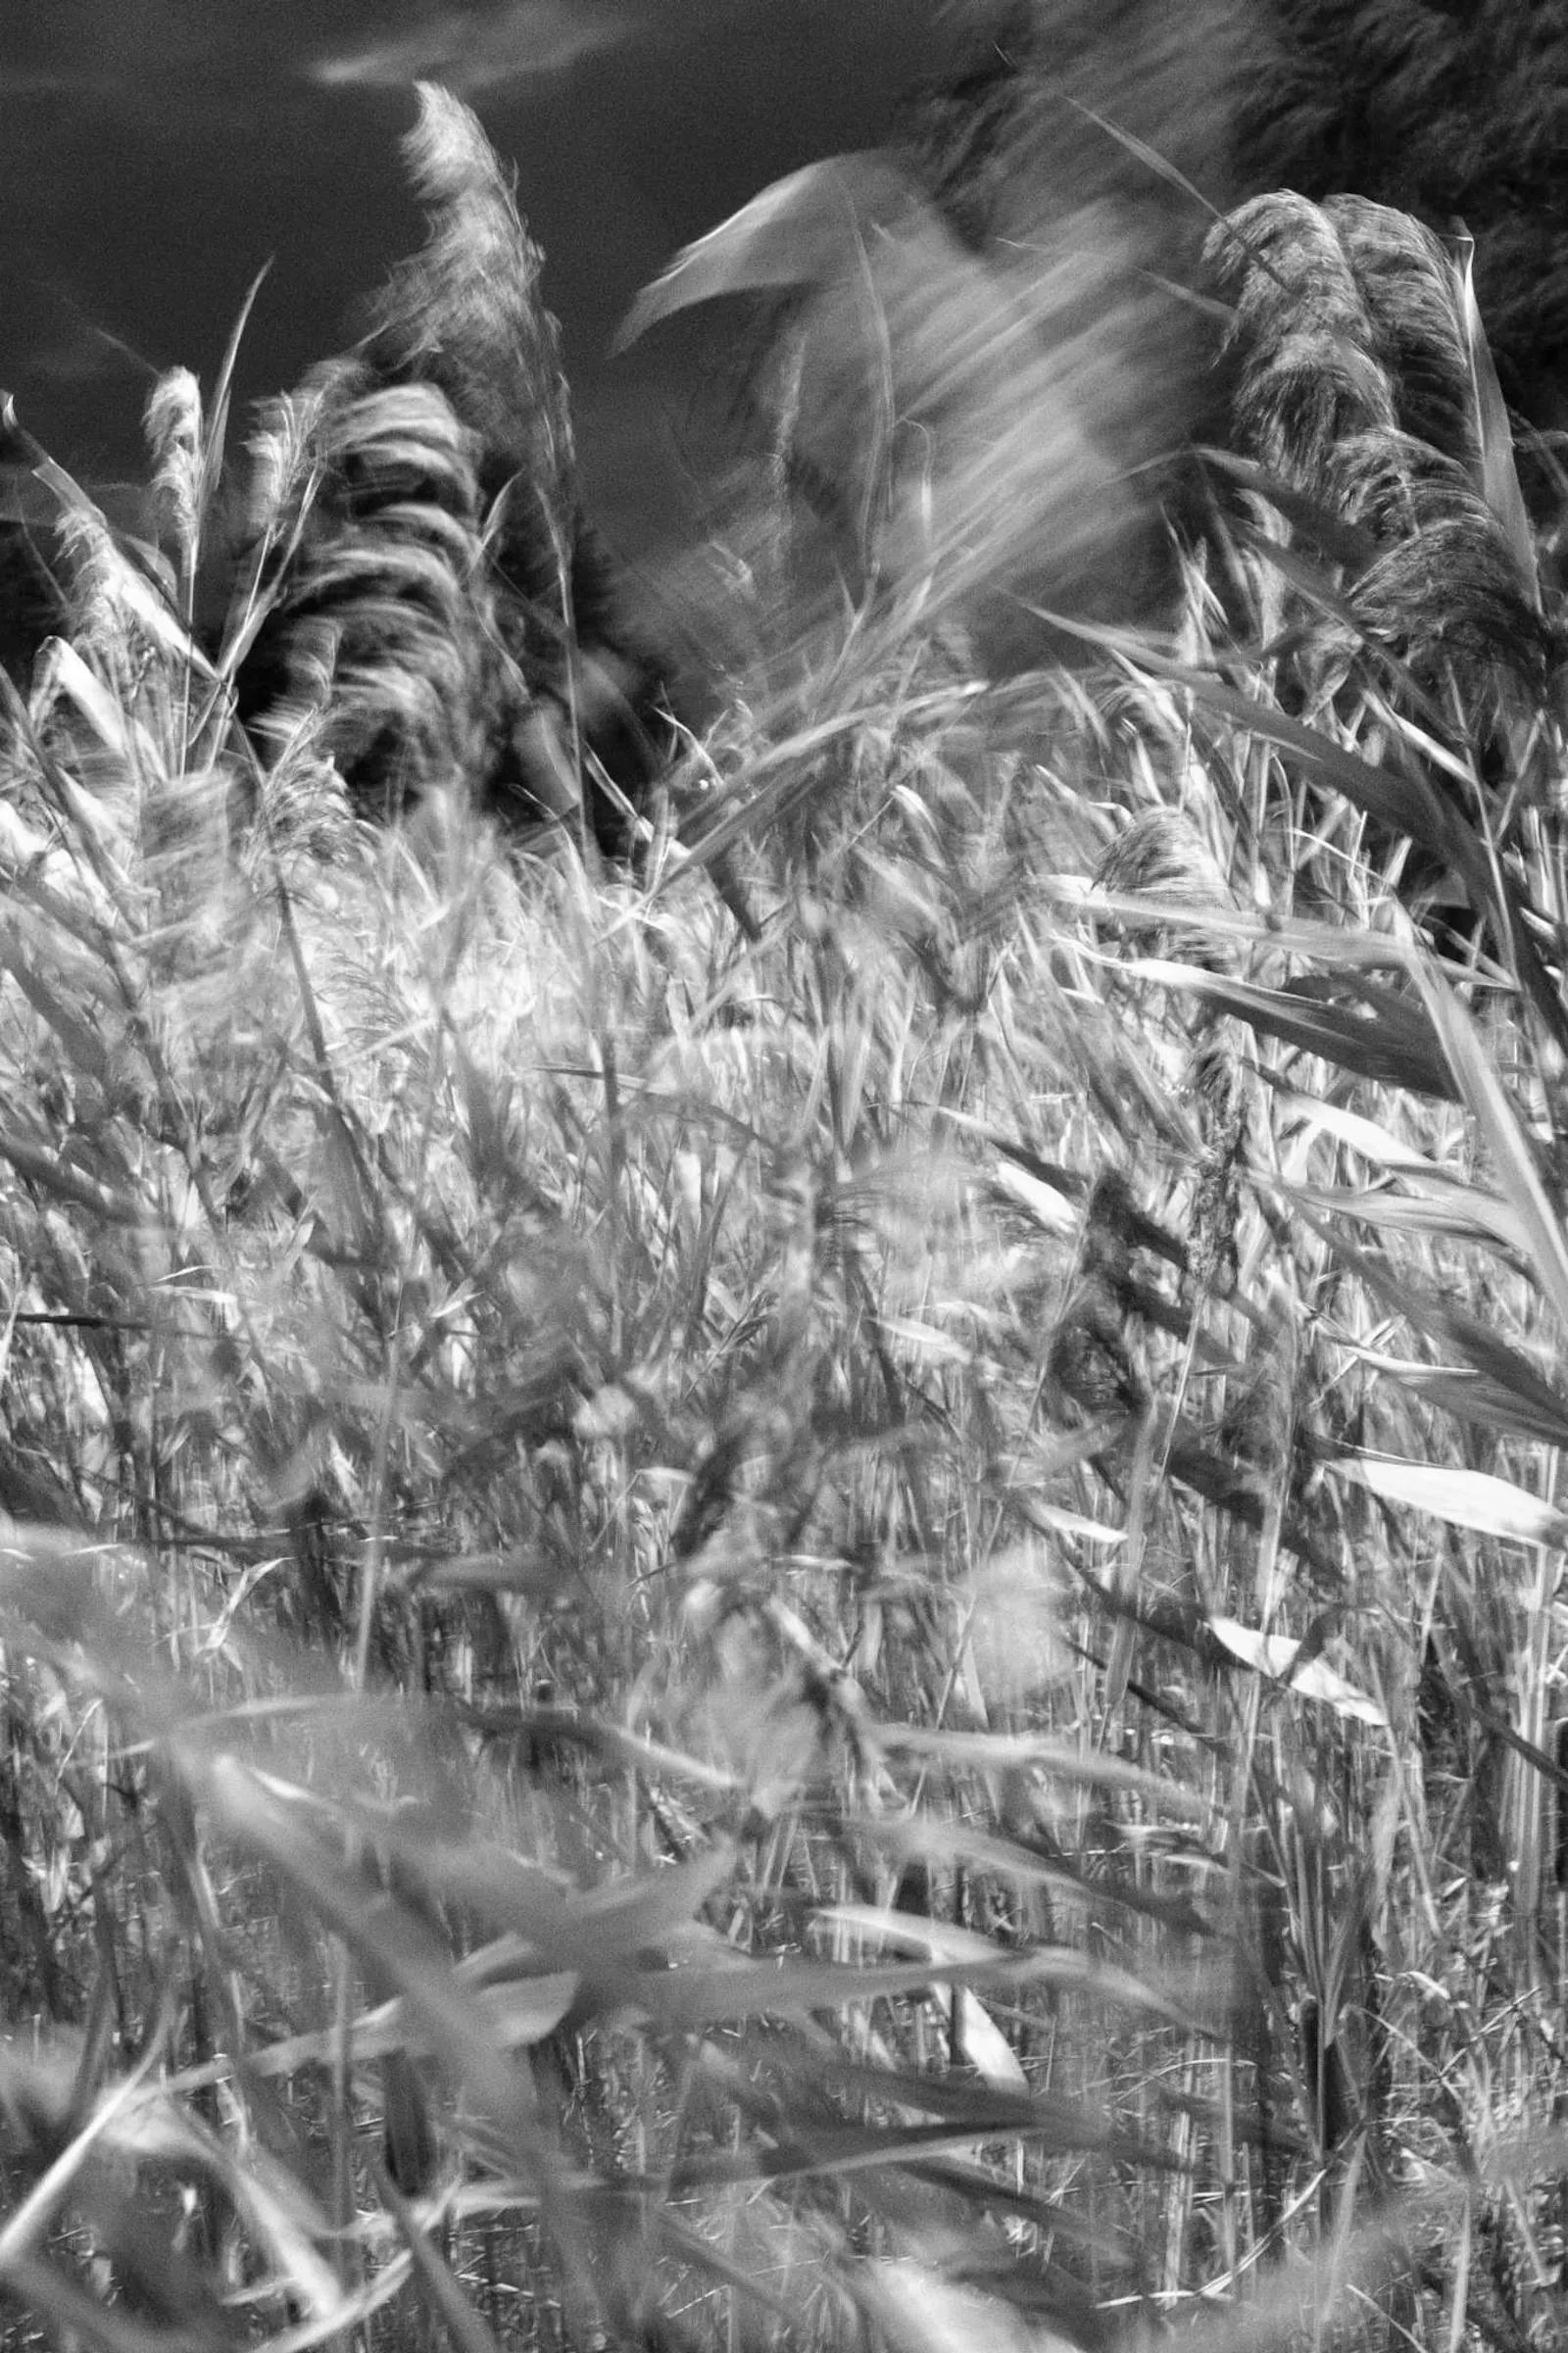 A grainy black and white photograph of the reeds in Parc Jarry, Montréal, getting swept in the wind.